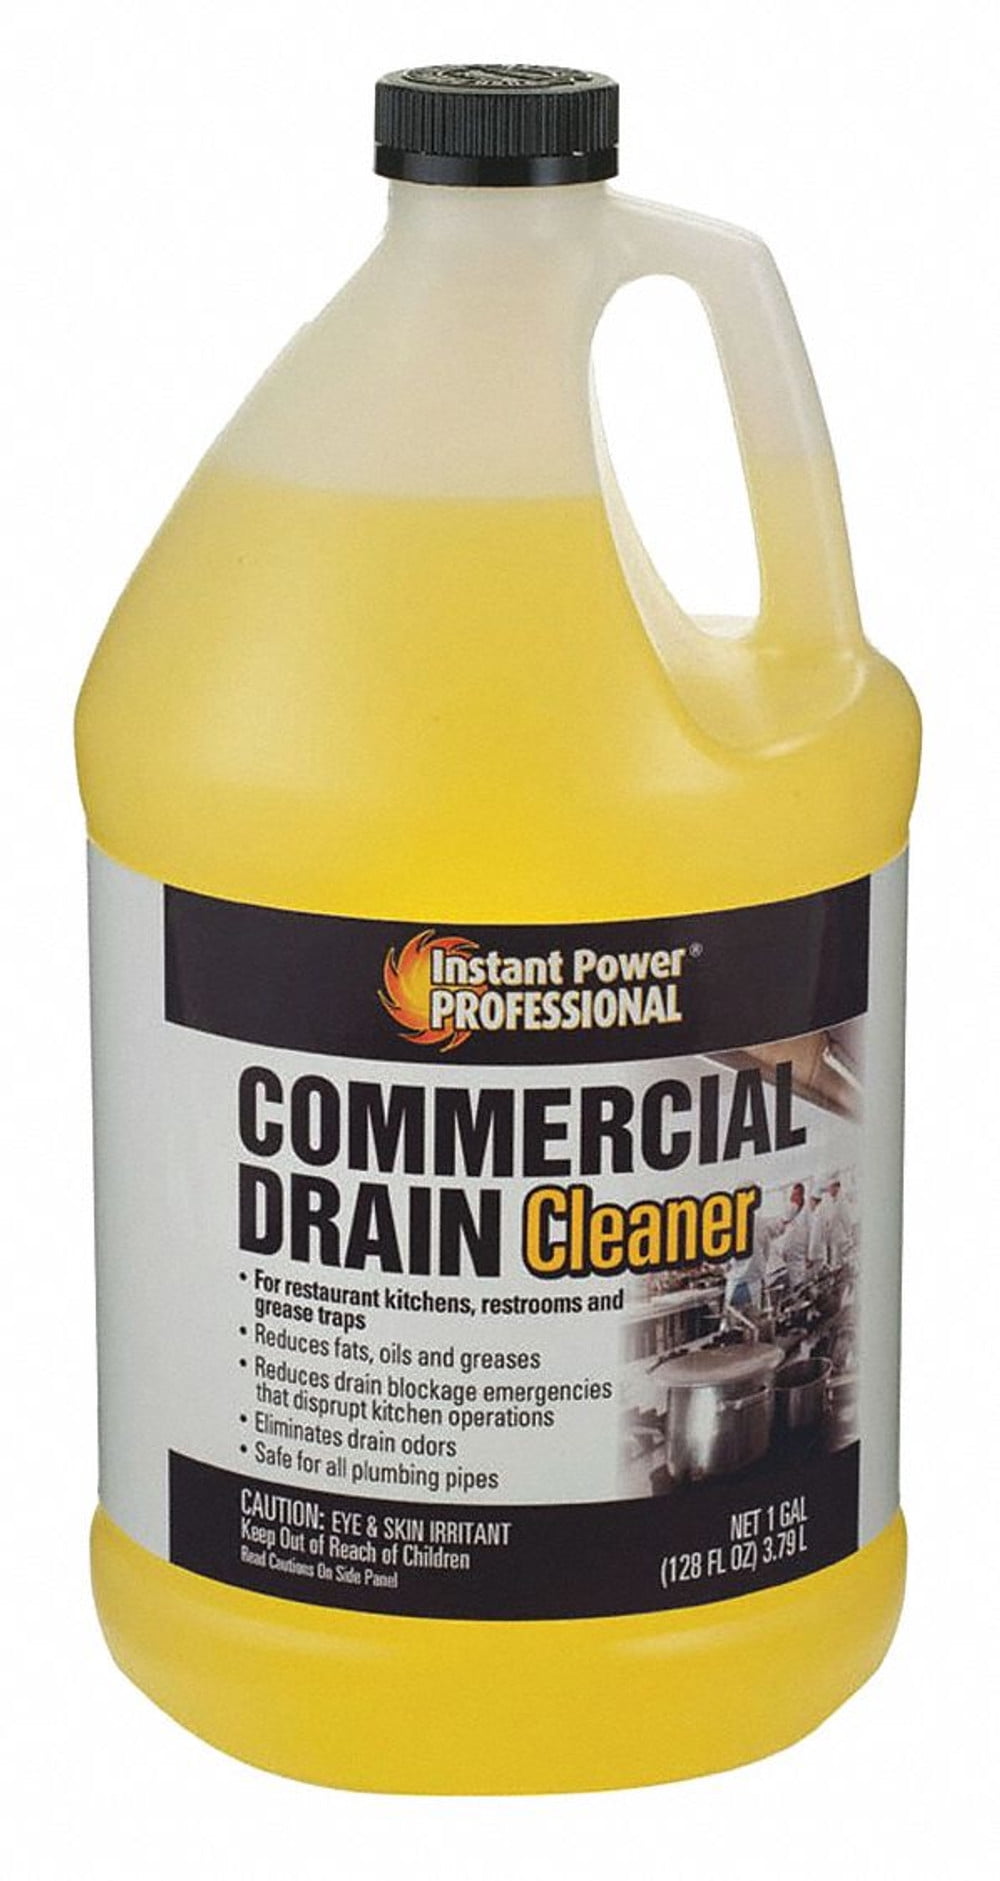 Crystal Lye Drain Cleaner  Instant Power Professional